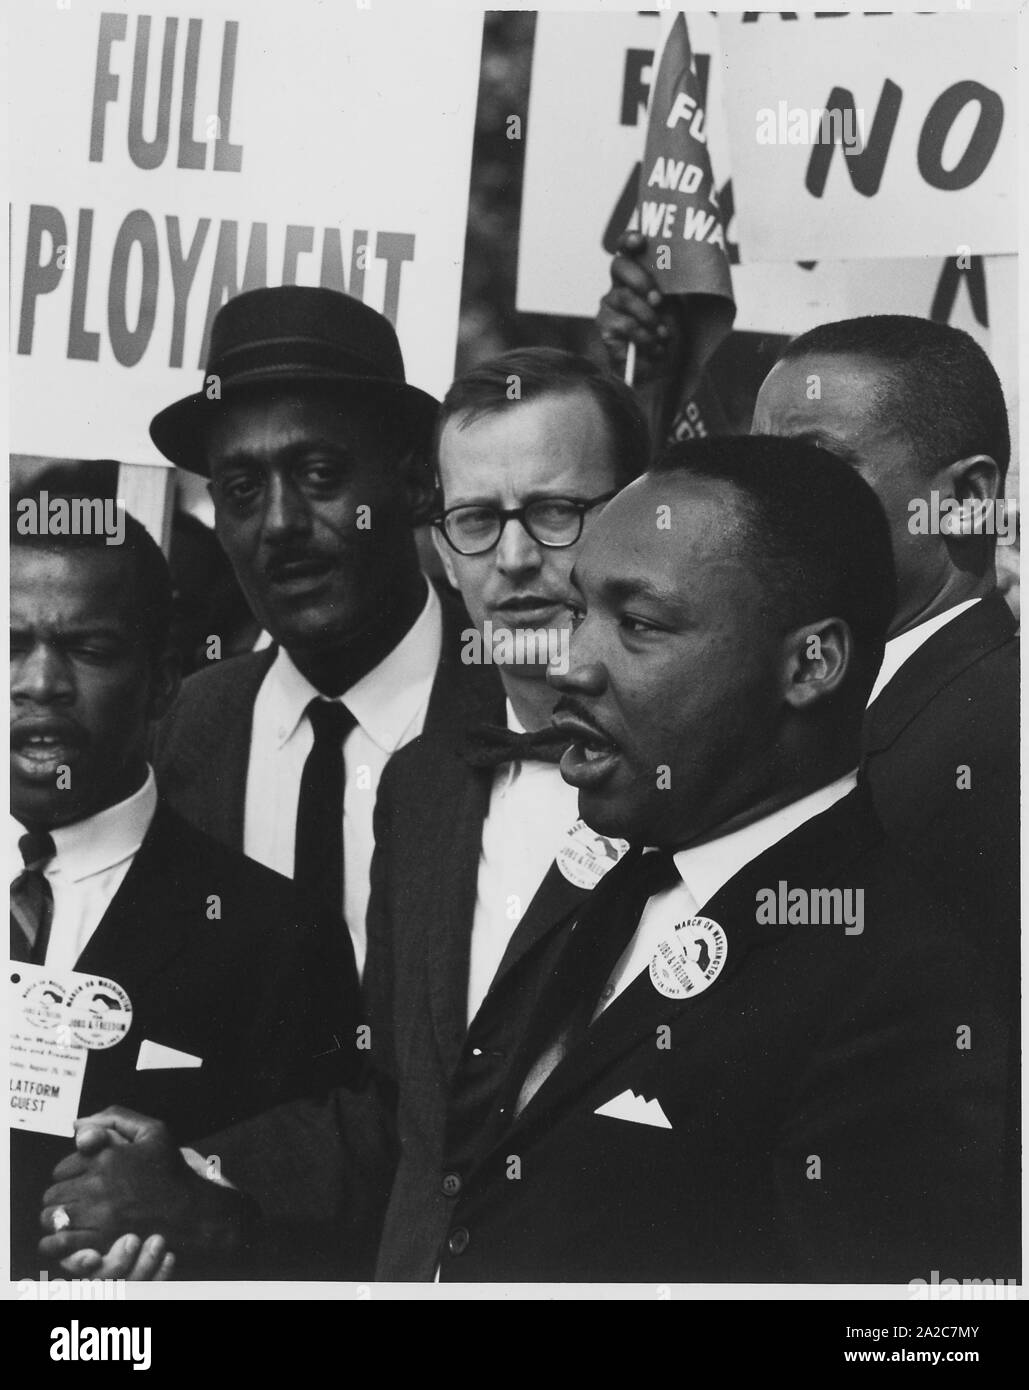 Dr Martin Luther King, Jr, August 28, 1963. President of the Southern Christian Leadership Conference, and Mathew Ahmann, Executive Director of the National Catholic Conference for Interracial Justice, during a civil rights march, Washington, District of Columbia. Image courtesy National Archives. () Stock Photo